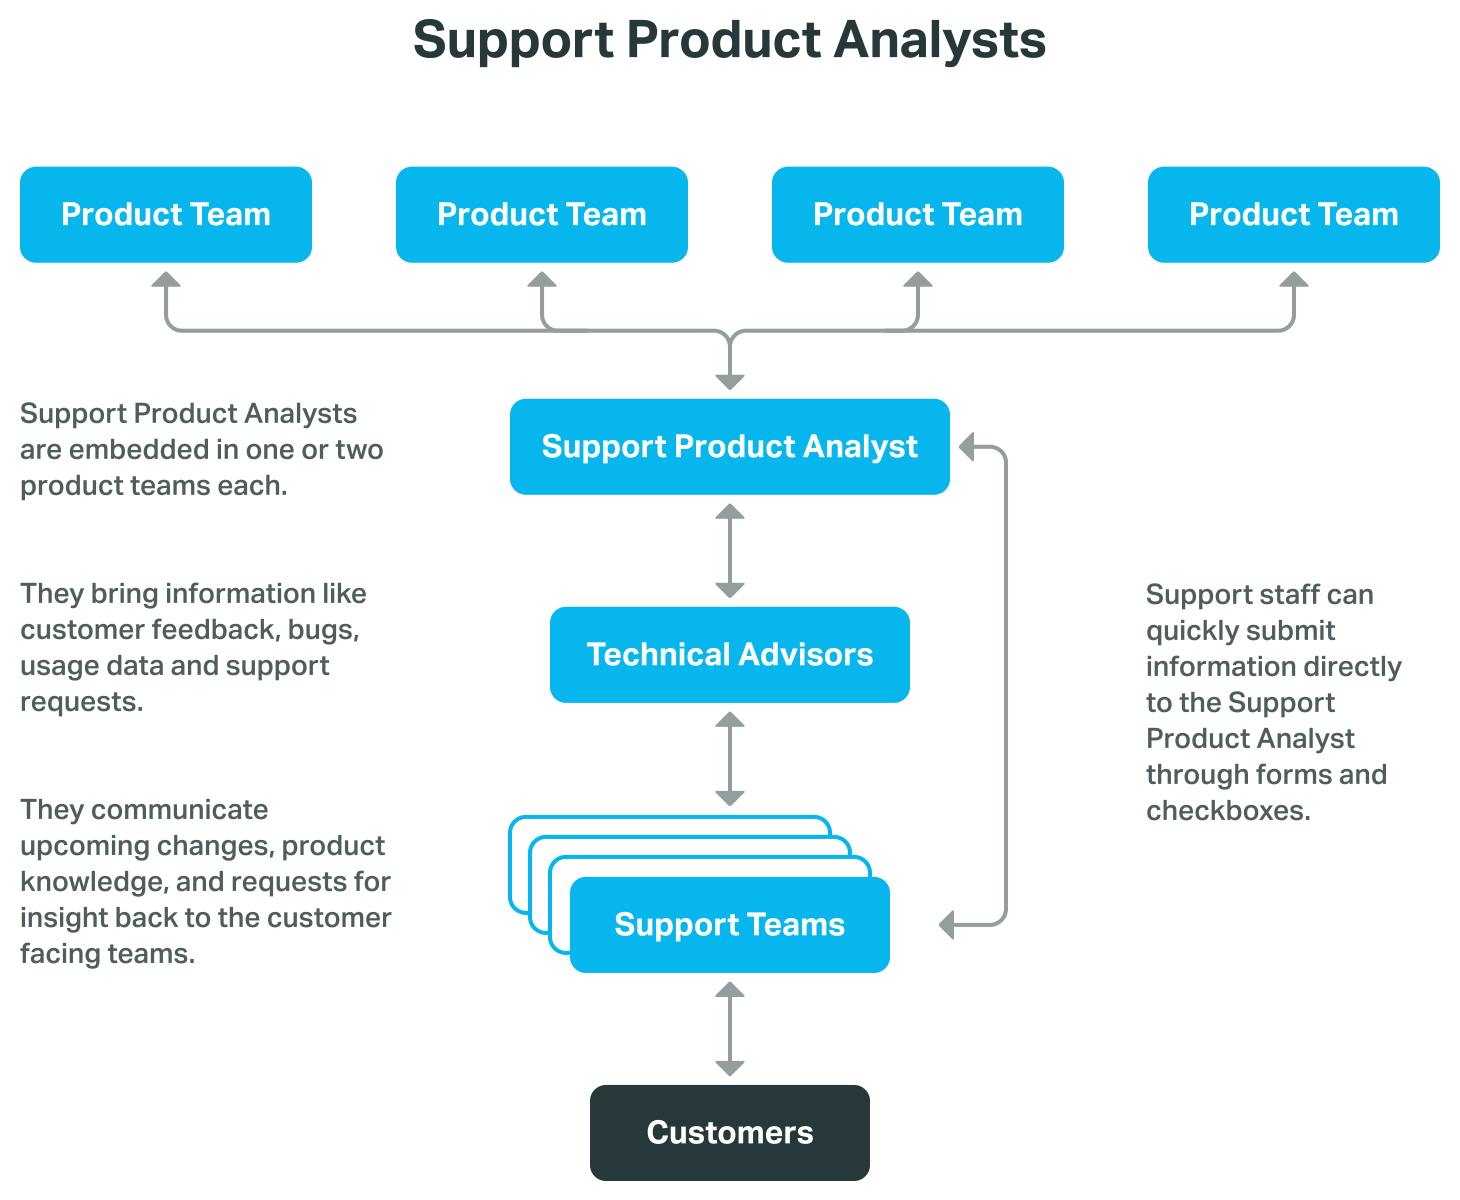 Support Product Analyst